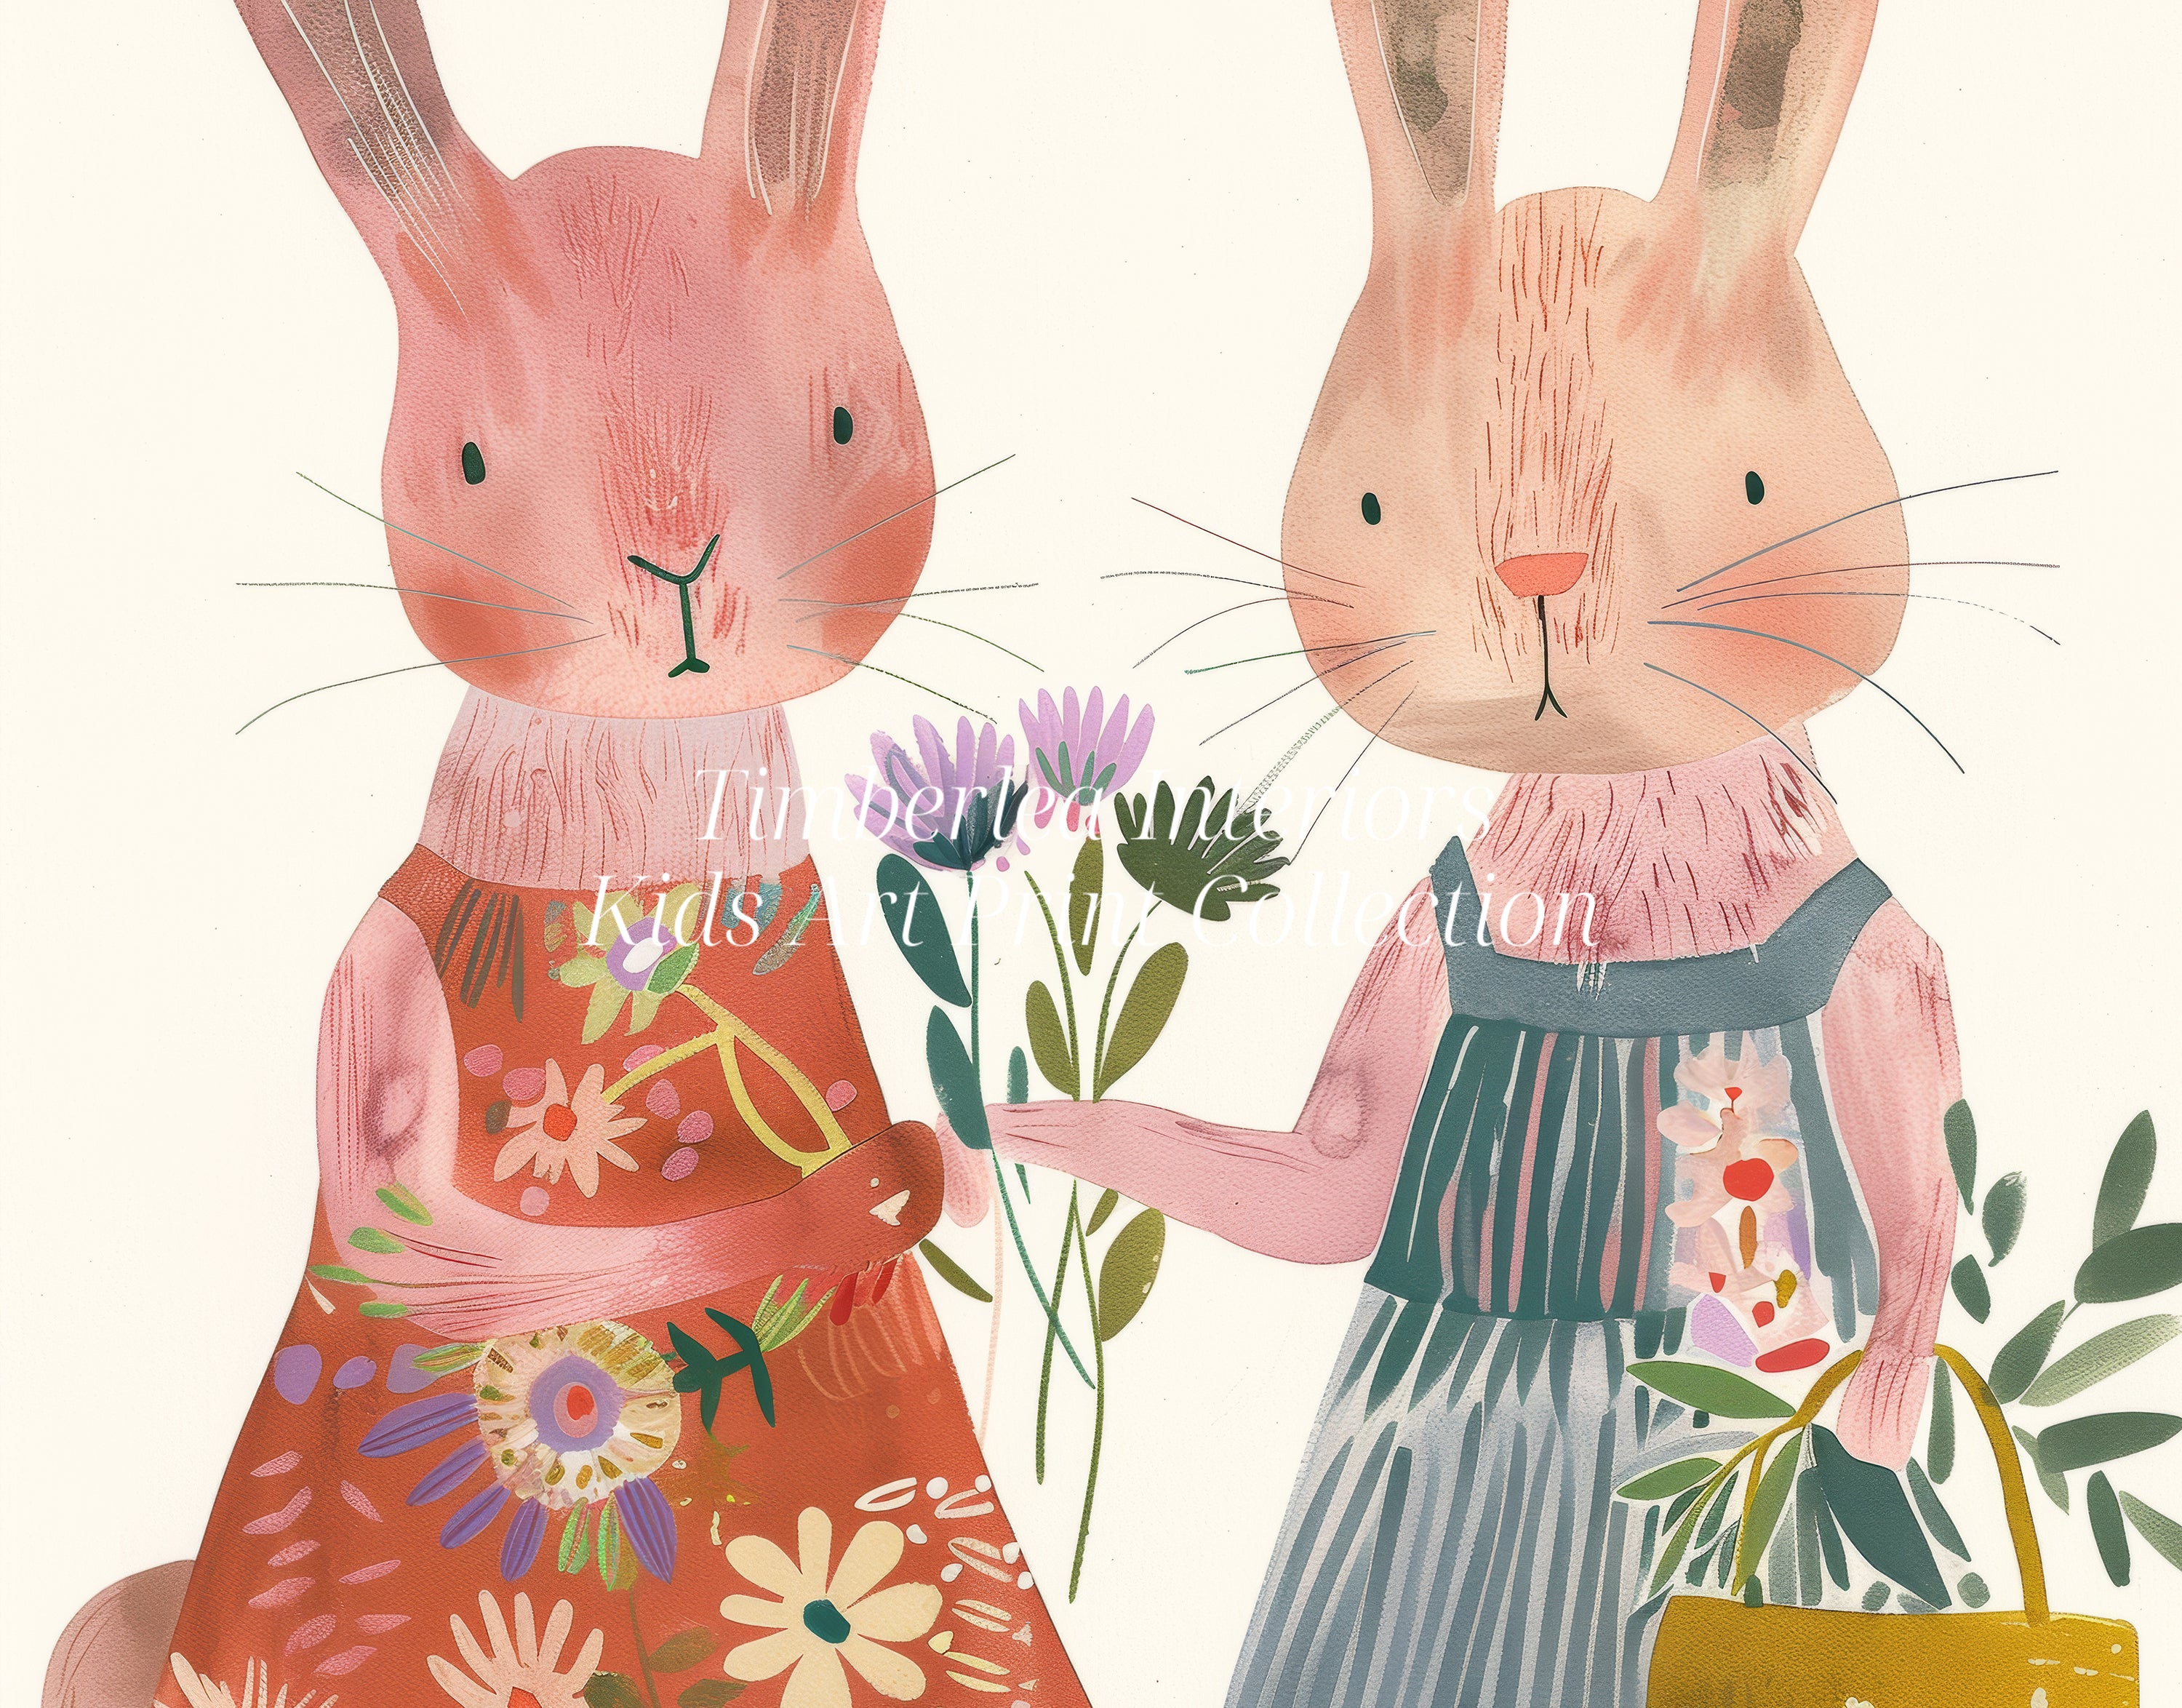 Close-up view of a whimsical art print featuring two adorable bunnies in charming outfits, holding flowers and a basket